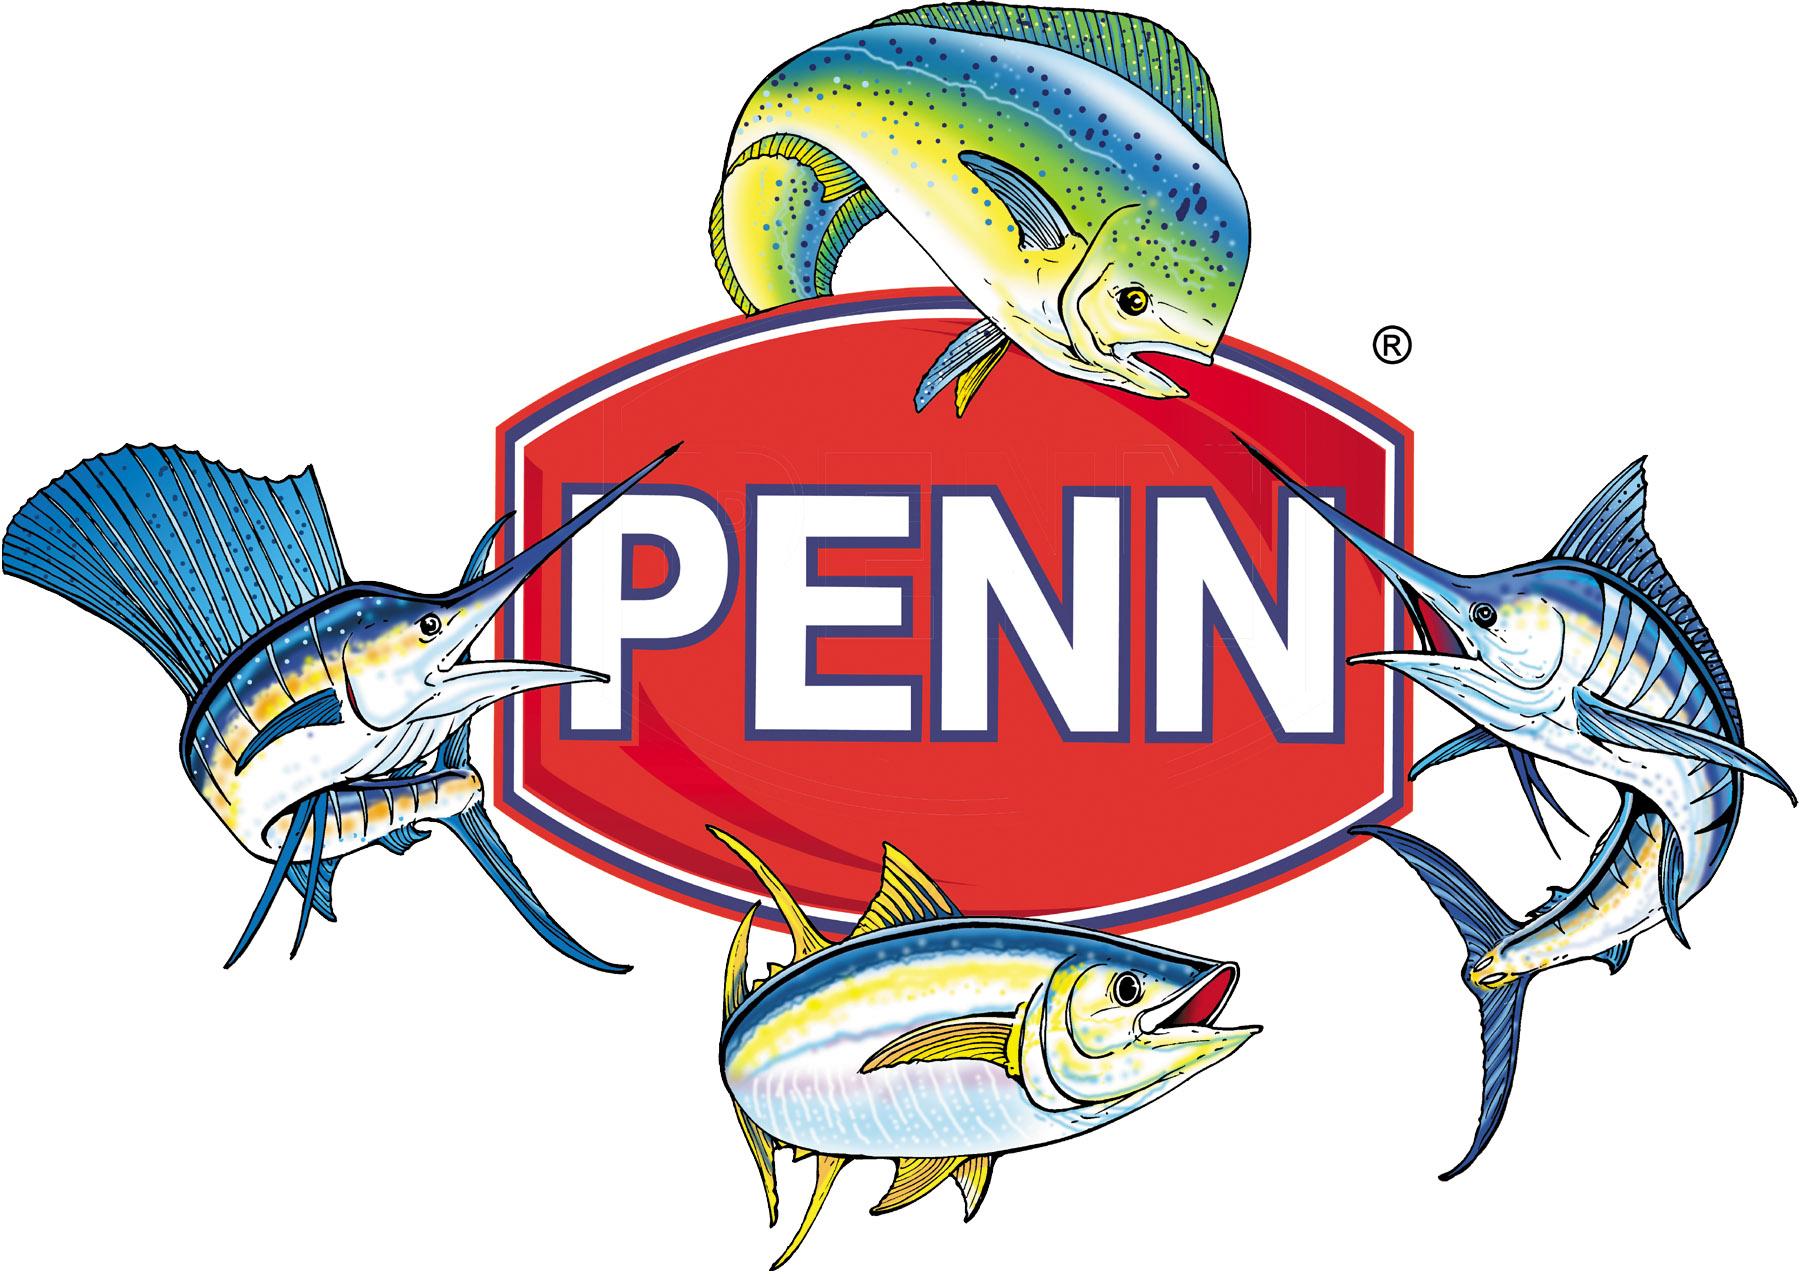 Penn Logo - Index Of Catalog Store Image Pennparts PennGraphicsDownload Penn